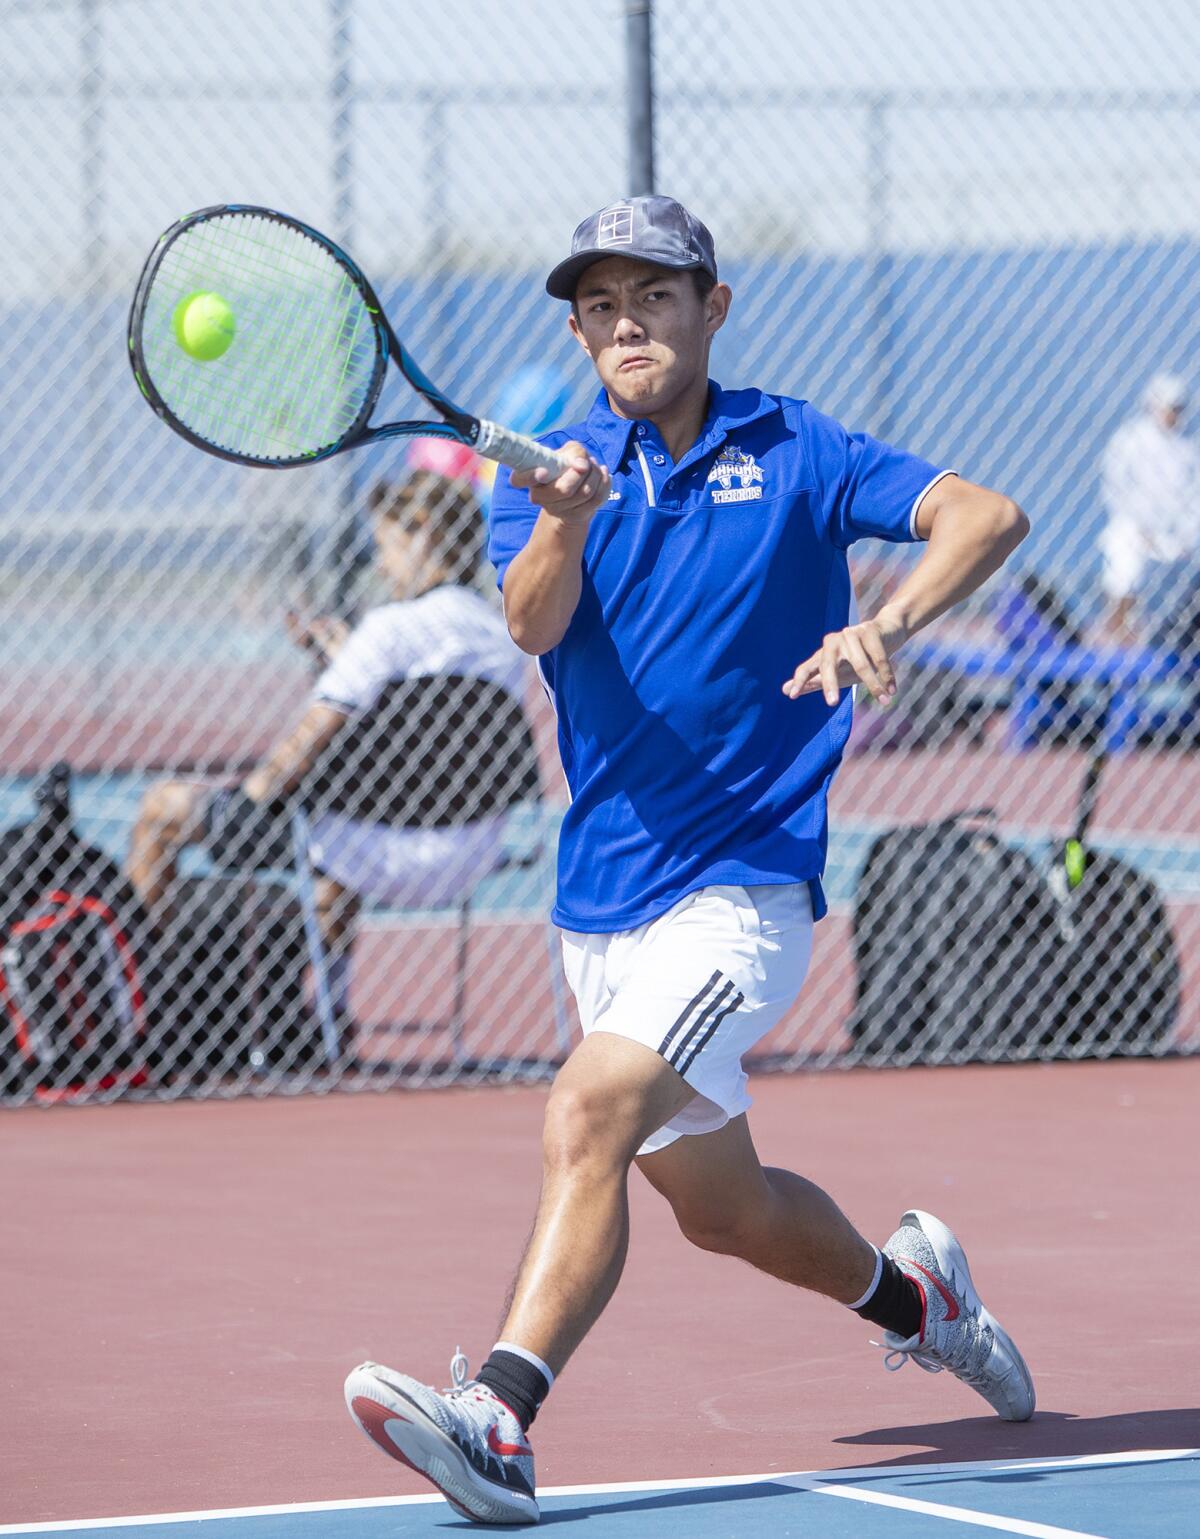 Fountain Valley High's Justin Nguyen returns a forehand during the first round of the CIF Southern Section Division 1 playoffs against Beverly Hills at home on Wednesday.